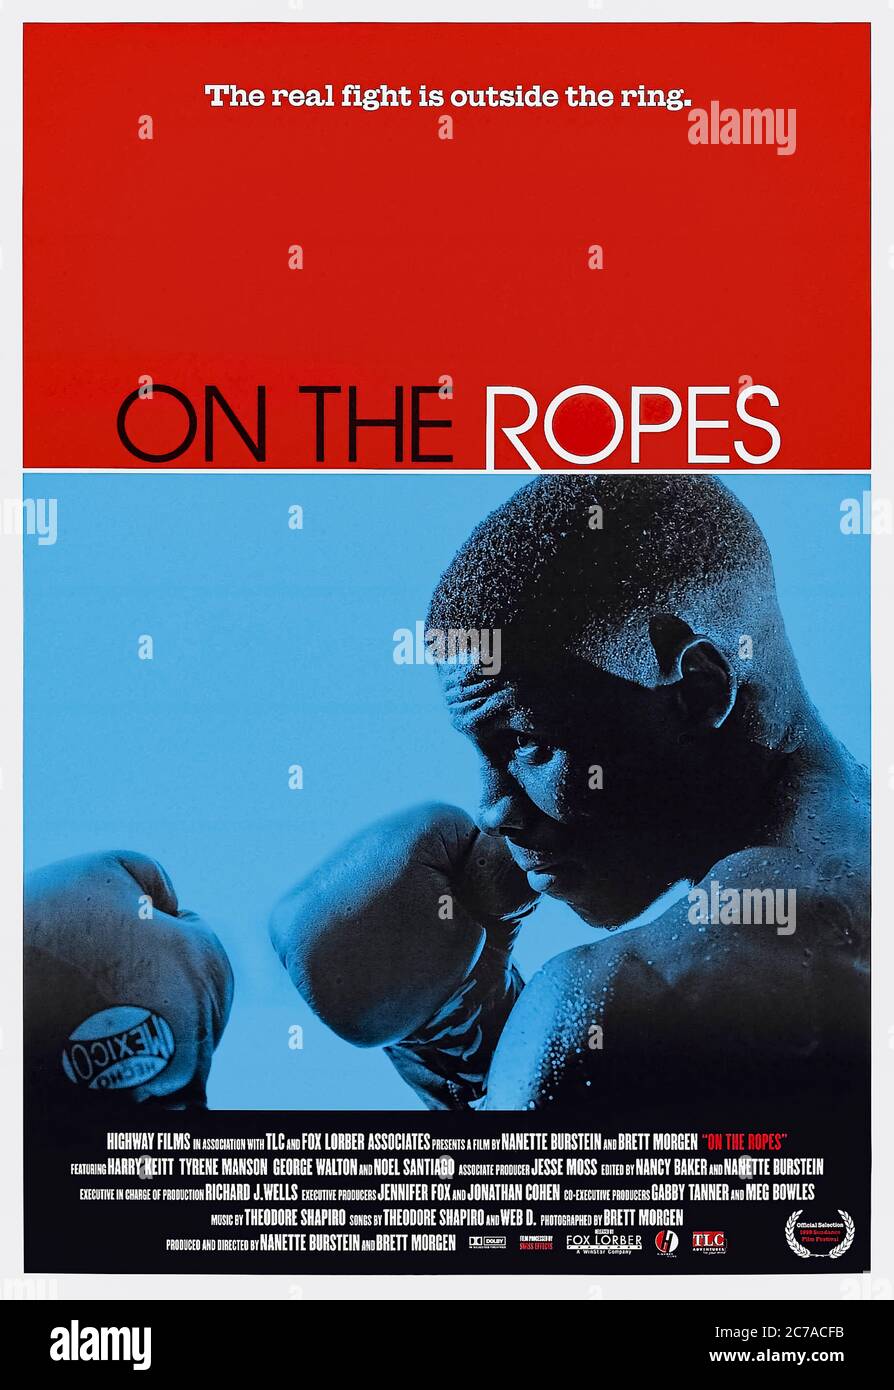 On the Ropes (1999) directed by Nanette Burstein and Brett Morgen and starring Sam Doumit, Martin Goldman and Harry Keitt. Documentary following boxing coach Harry Keitt and 3 young boxers both in and out of the ring. Stock Photo